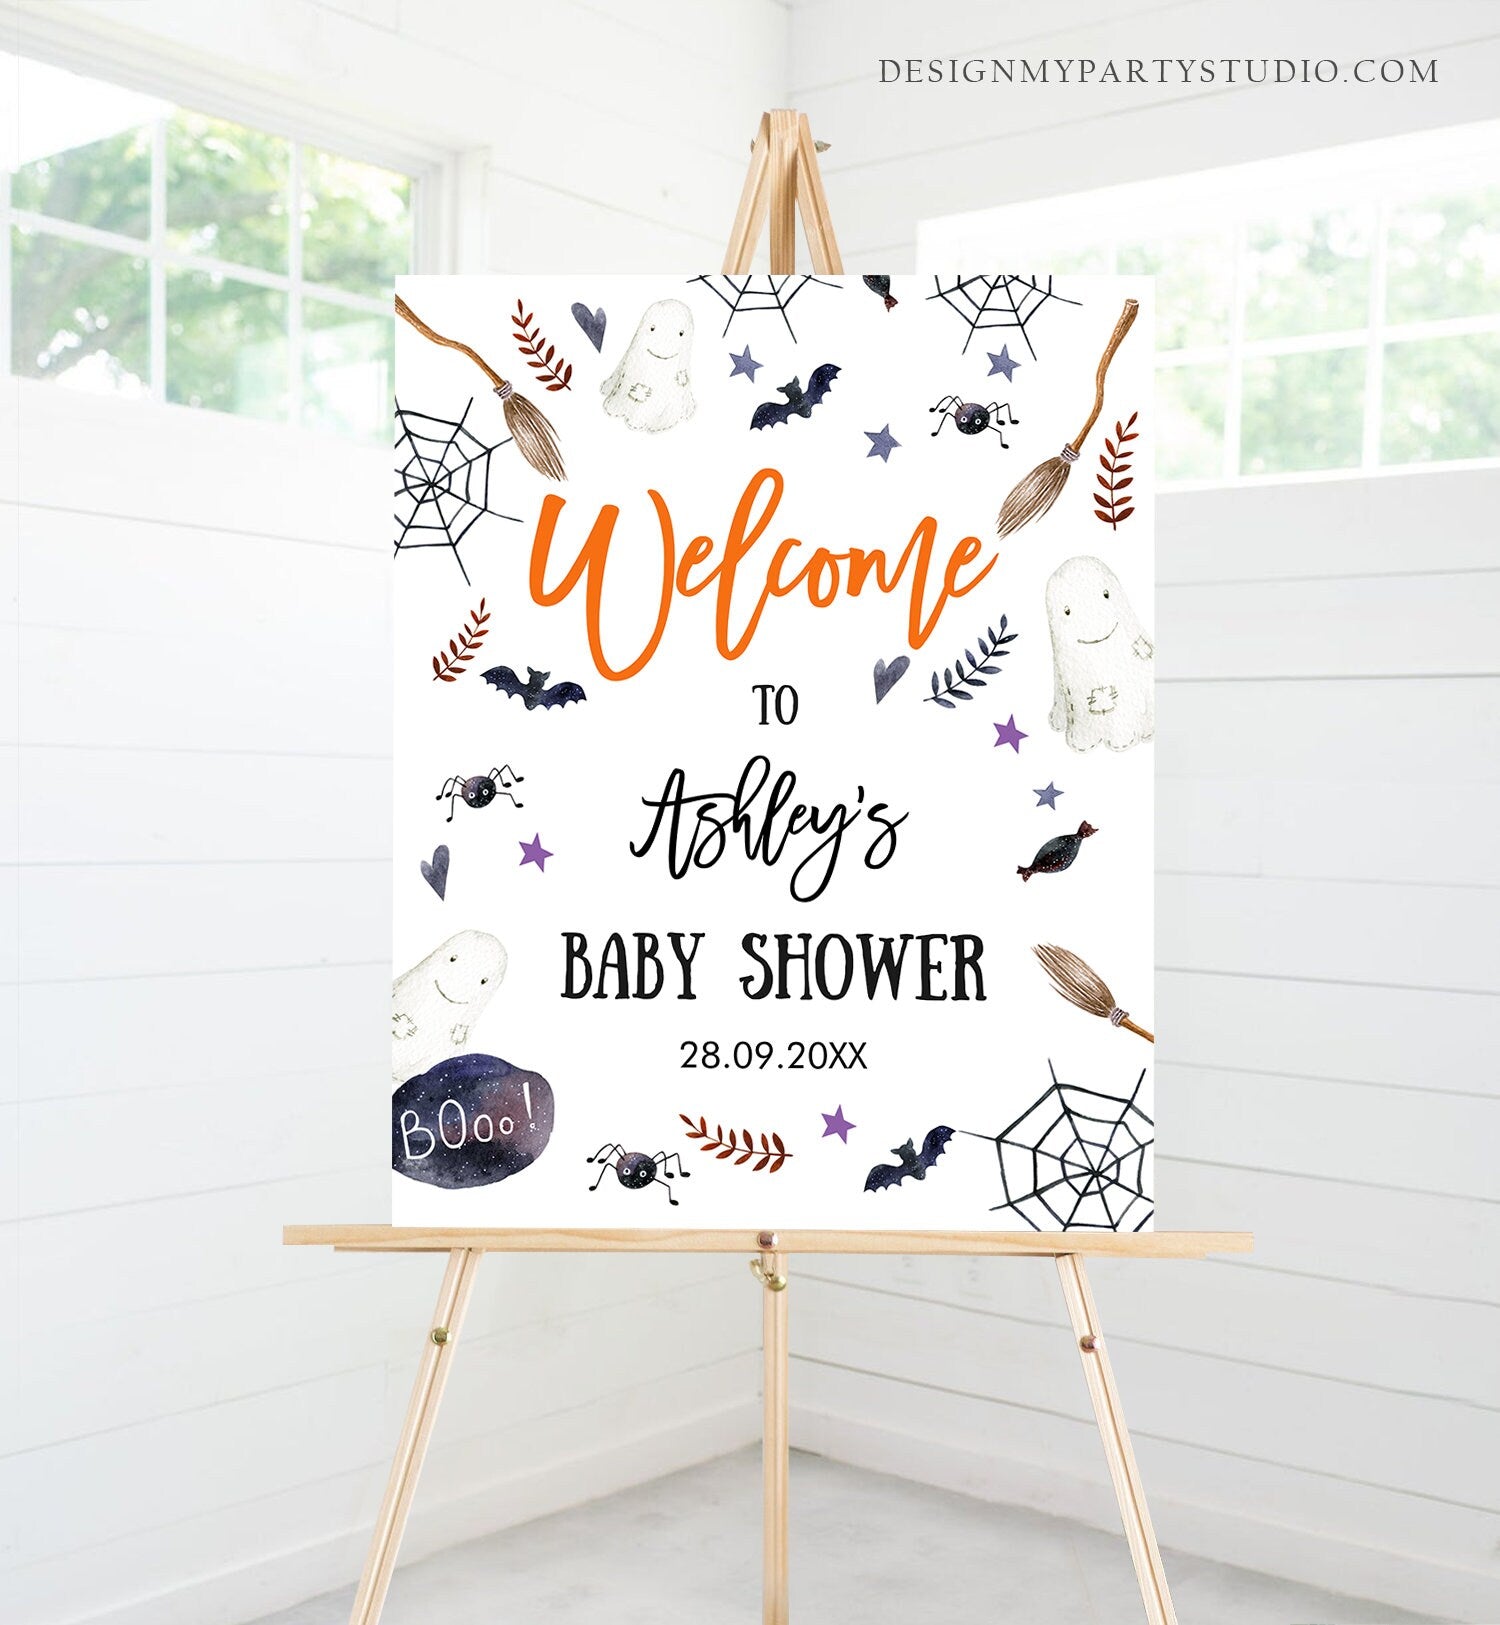 Editable Halloween Baby Shower Welcome Sign Peek A Boo Shower Decor Welcome Gender Neutral Little Boo Sign Template Corjl PRINTABLE 0199